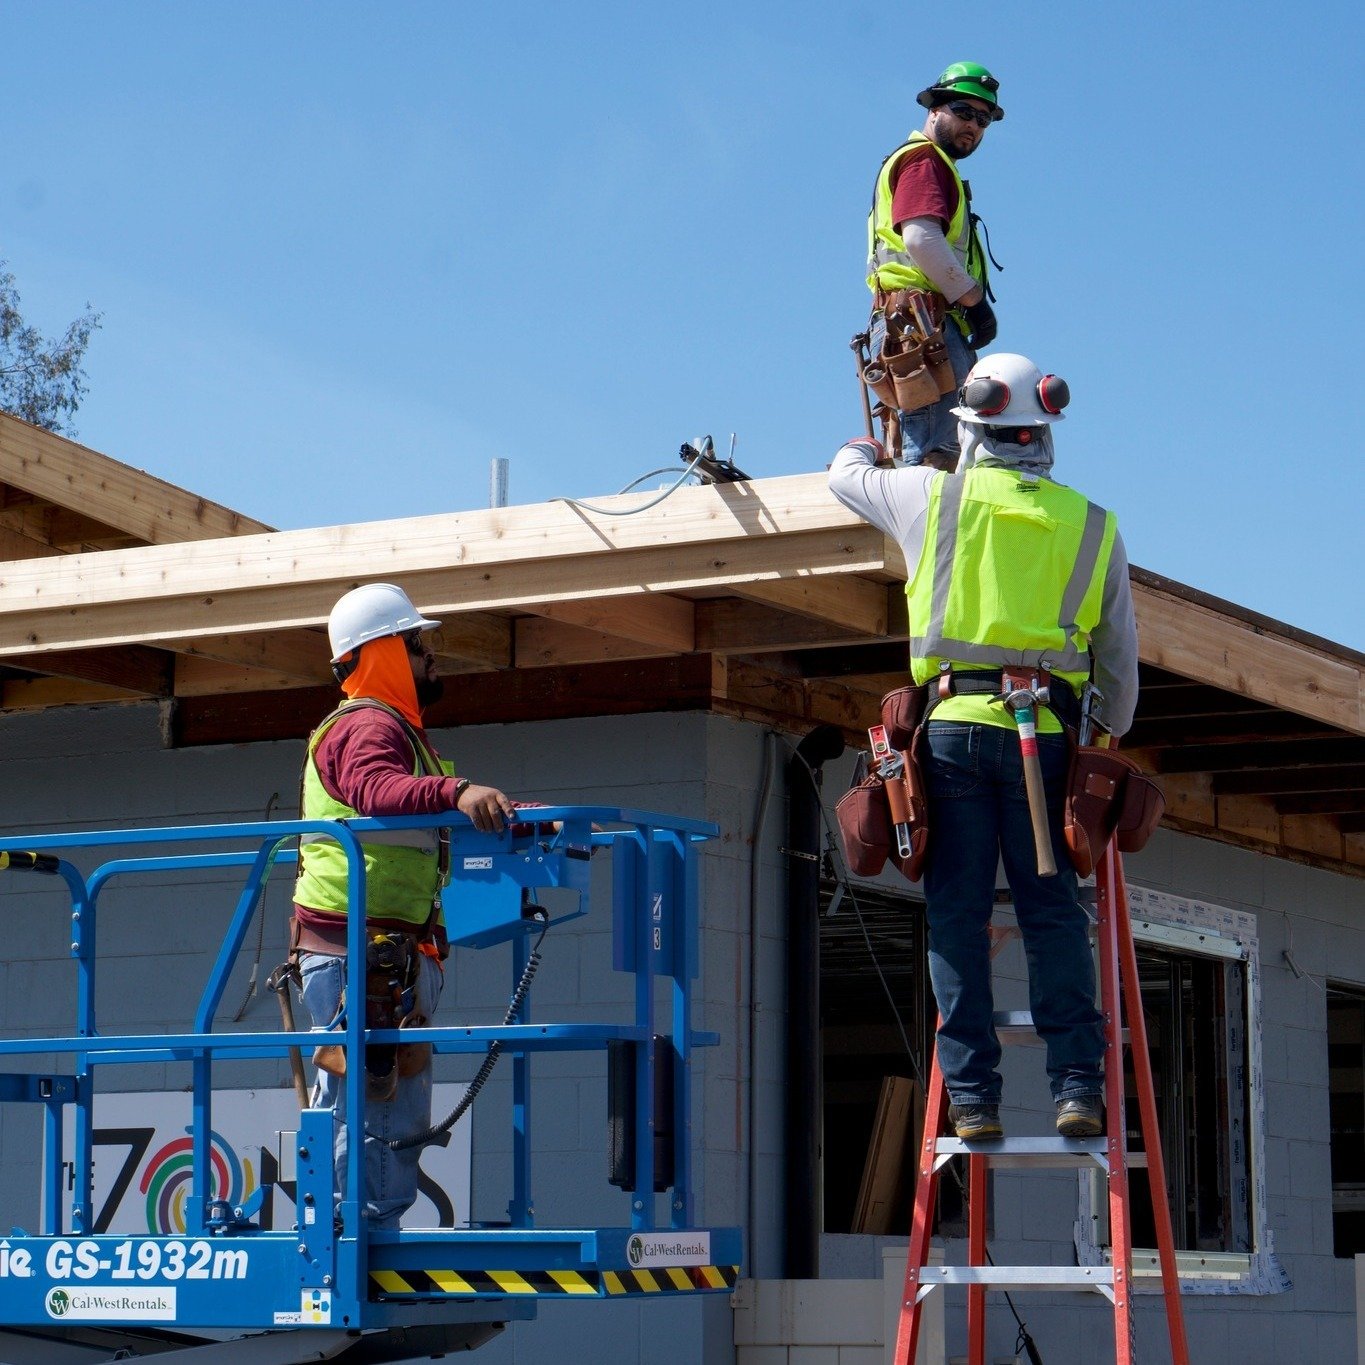 The Boys &amp; Girls Club of Greater Santa Rosa is changing its name to The Zones and undergoing major renovations. Improvements to the existing building and property are being made, including creating new office spaces, increasing interior volume, m